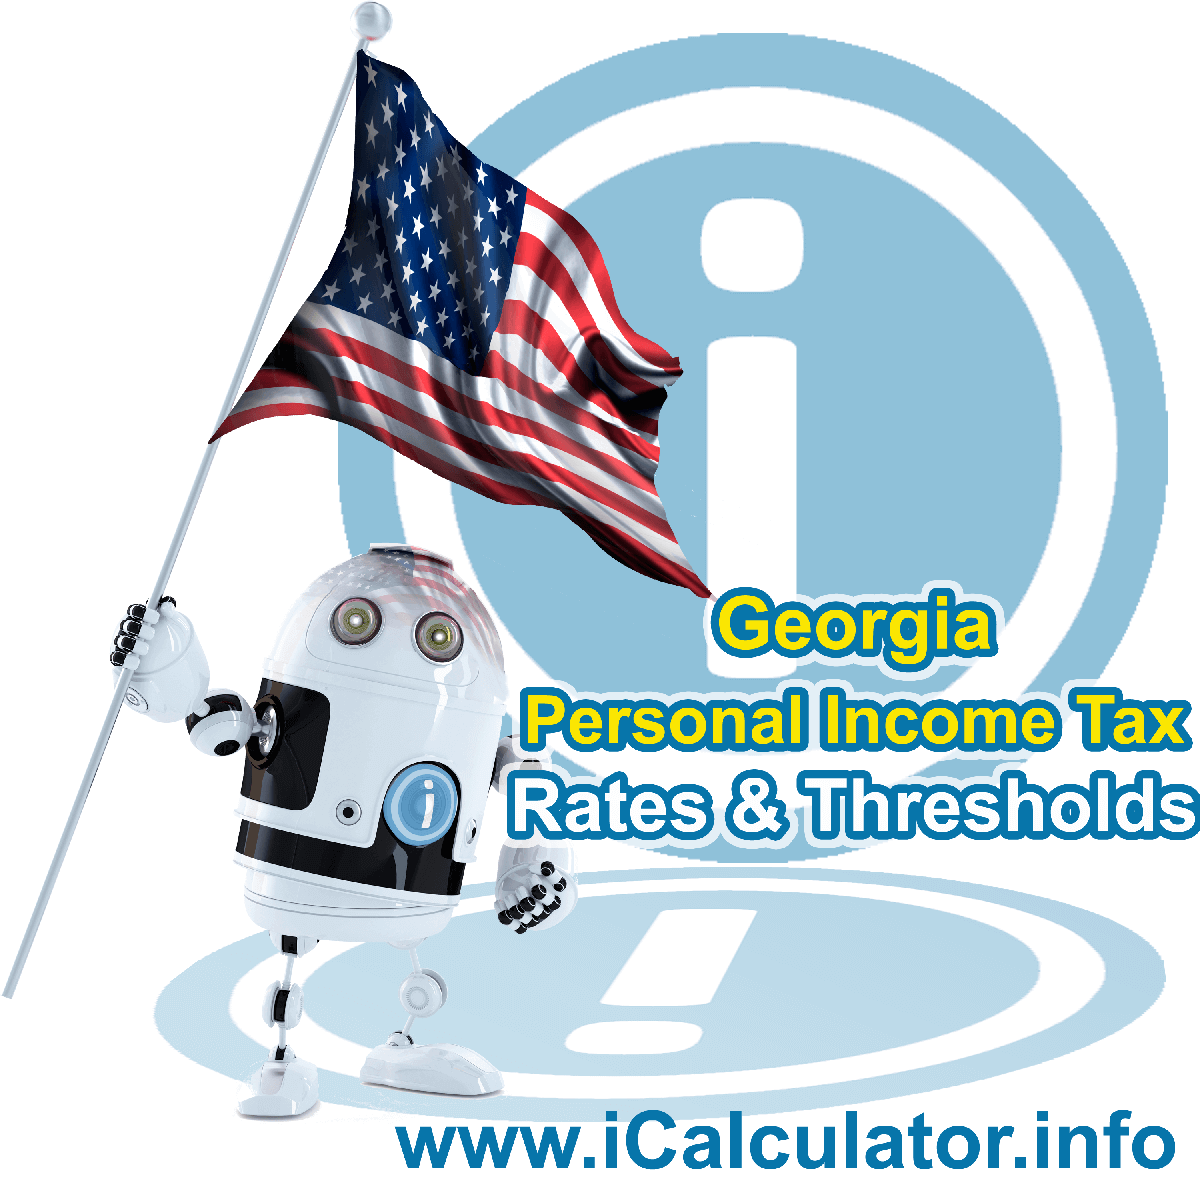 Georgia State Tax Tables 2016. This image displays details of the Georgia State Tax Tables for the 2016 tax return year which is provided in support of the 2016 US Tax Calculator